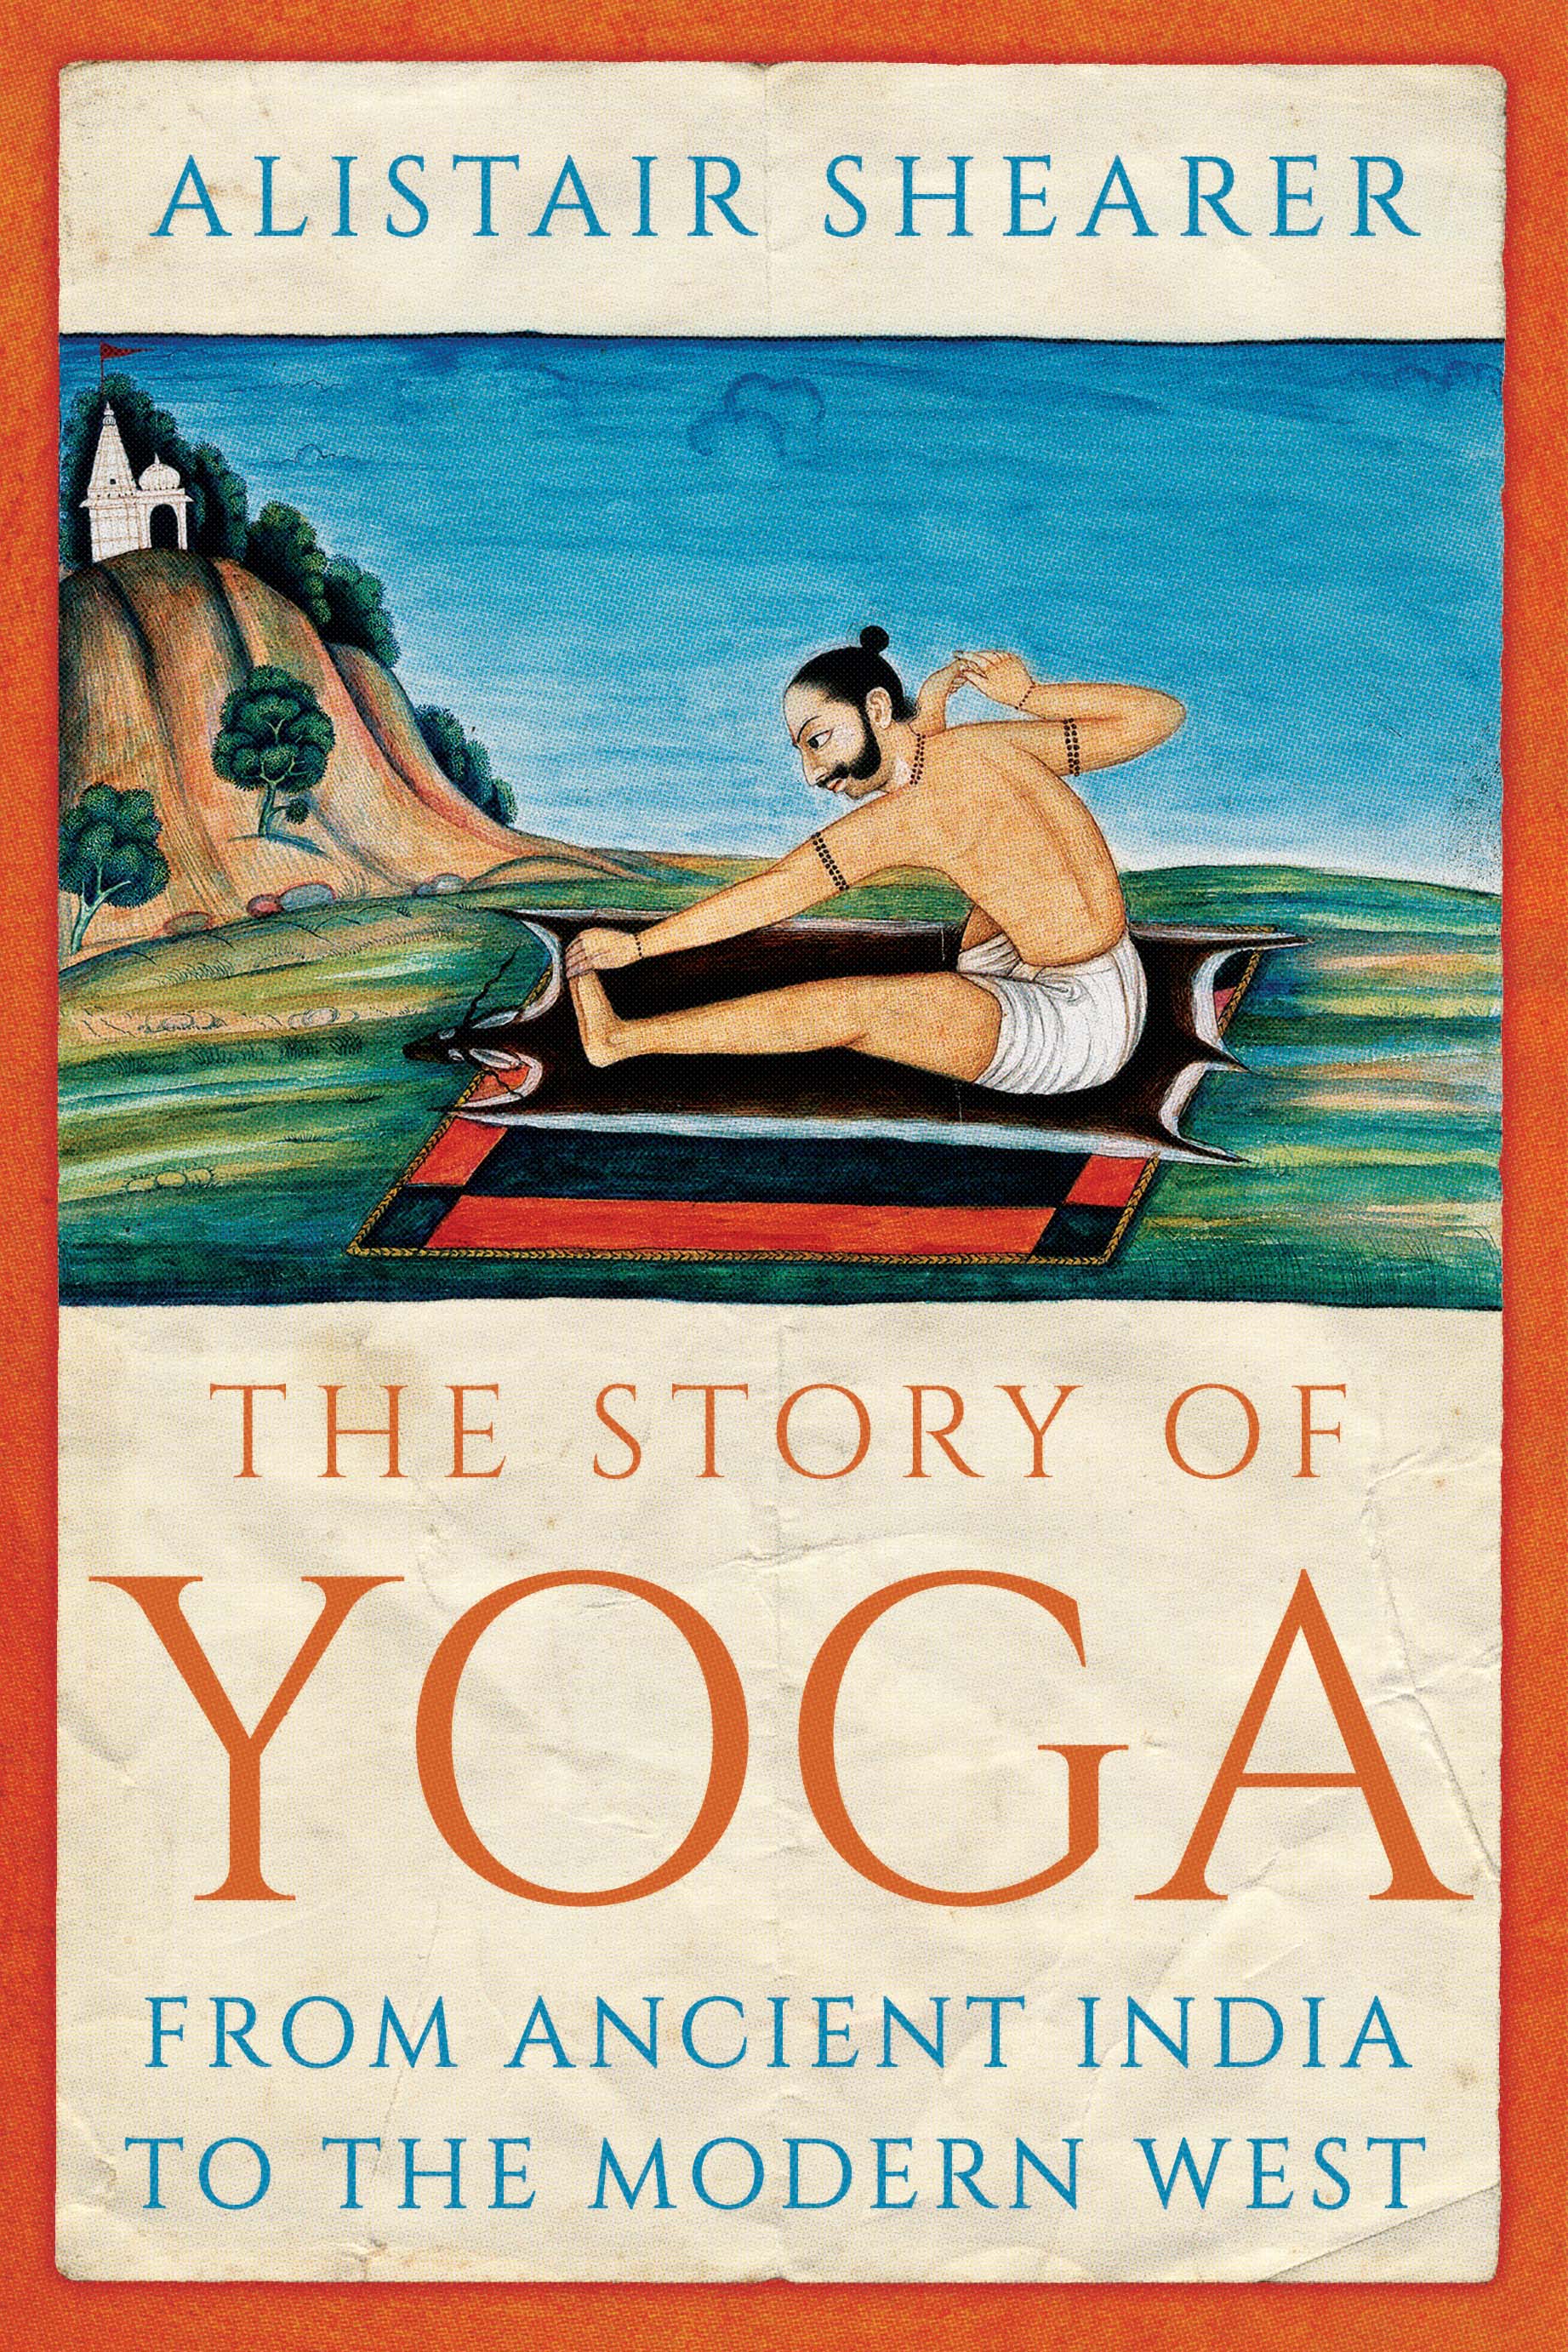 The Story of Yoga: Women in the West started embracing Yoga in the 1930's, and it became incorporated in their wider tradition of Female Exercise